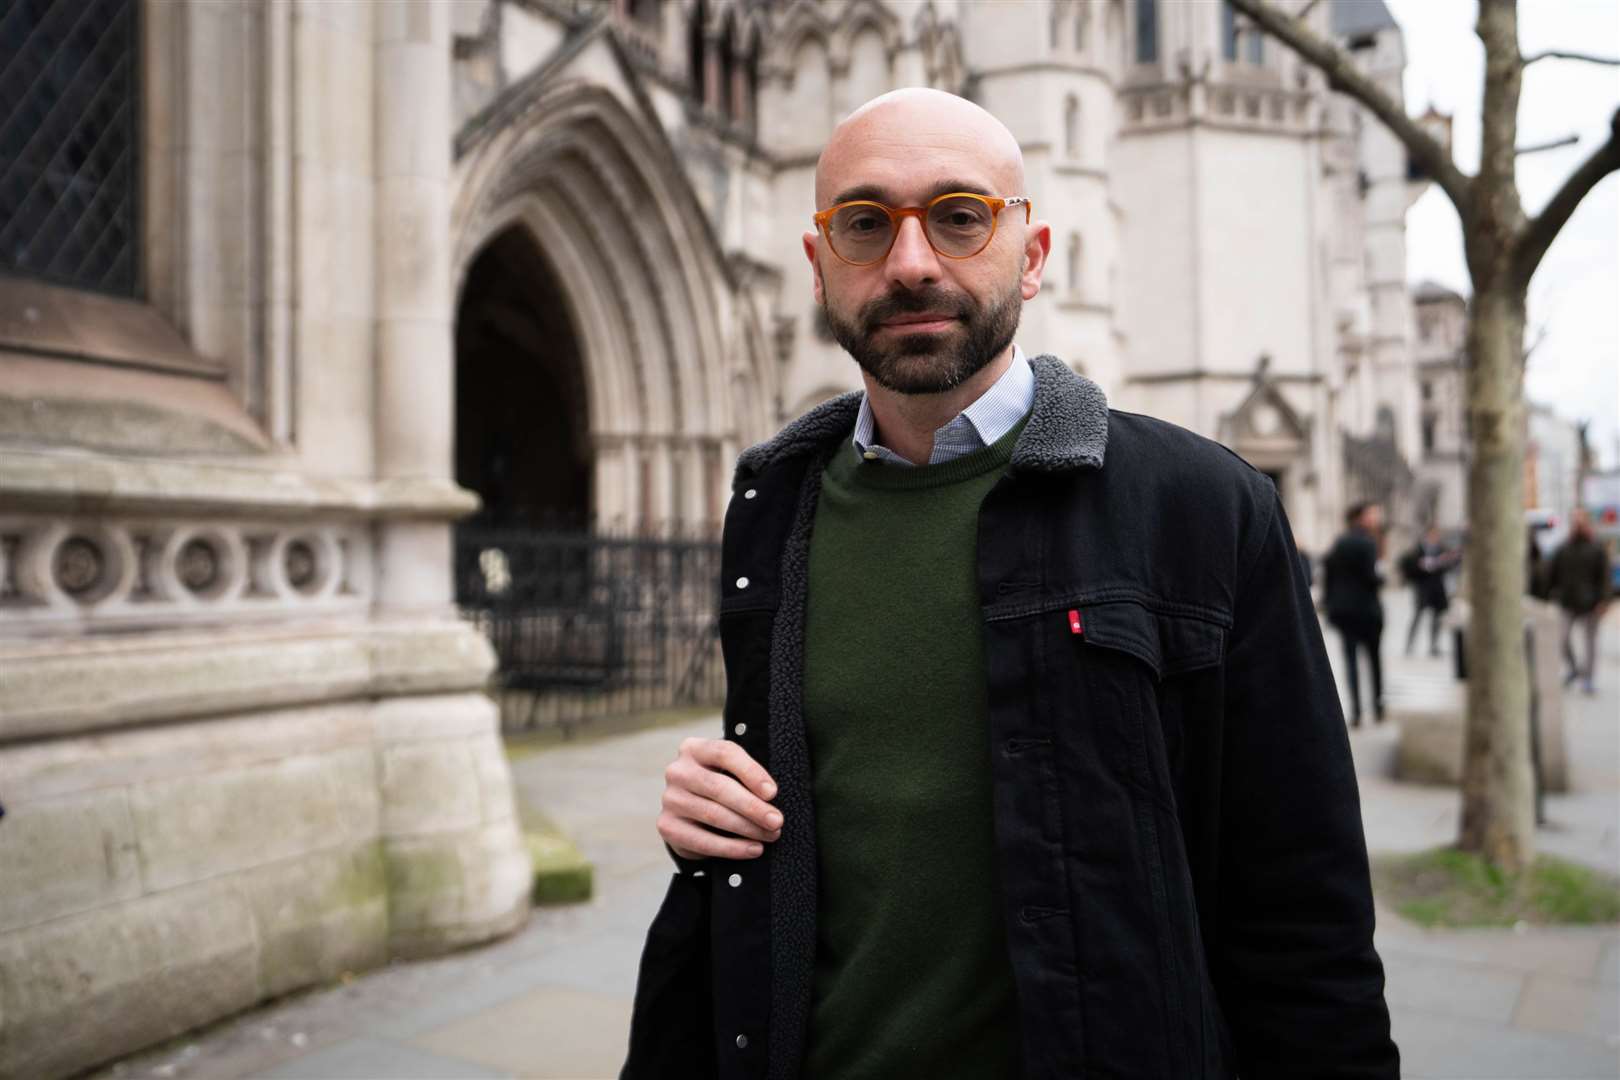 Carlo Palombo was found guilty of conspiring with others to submit false or misleading Euribor submissions between 2005 and 2009 (James Manning/PA)